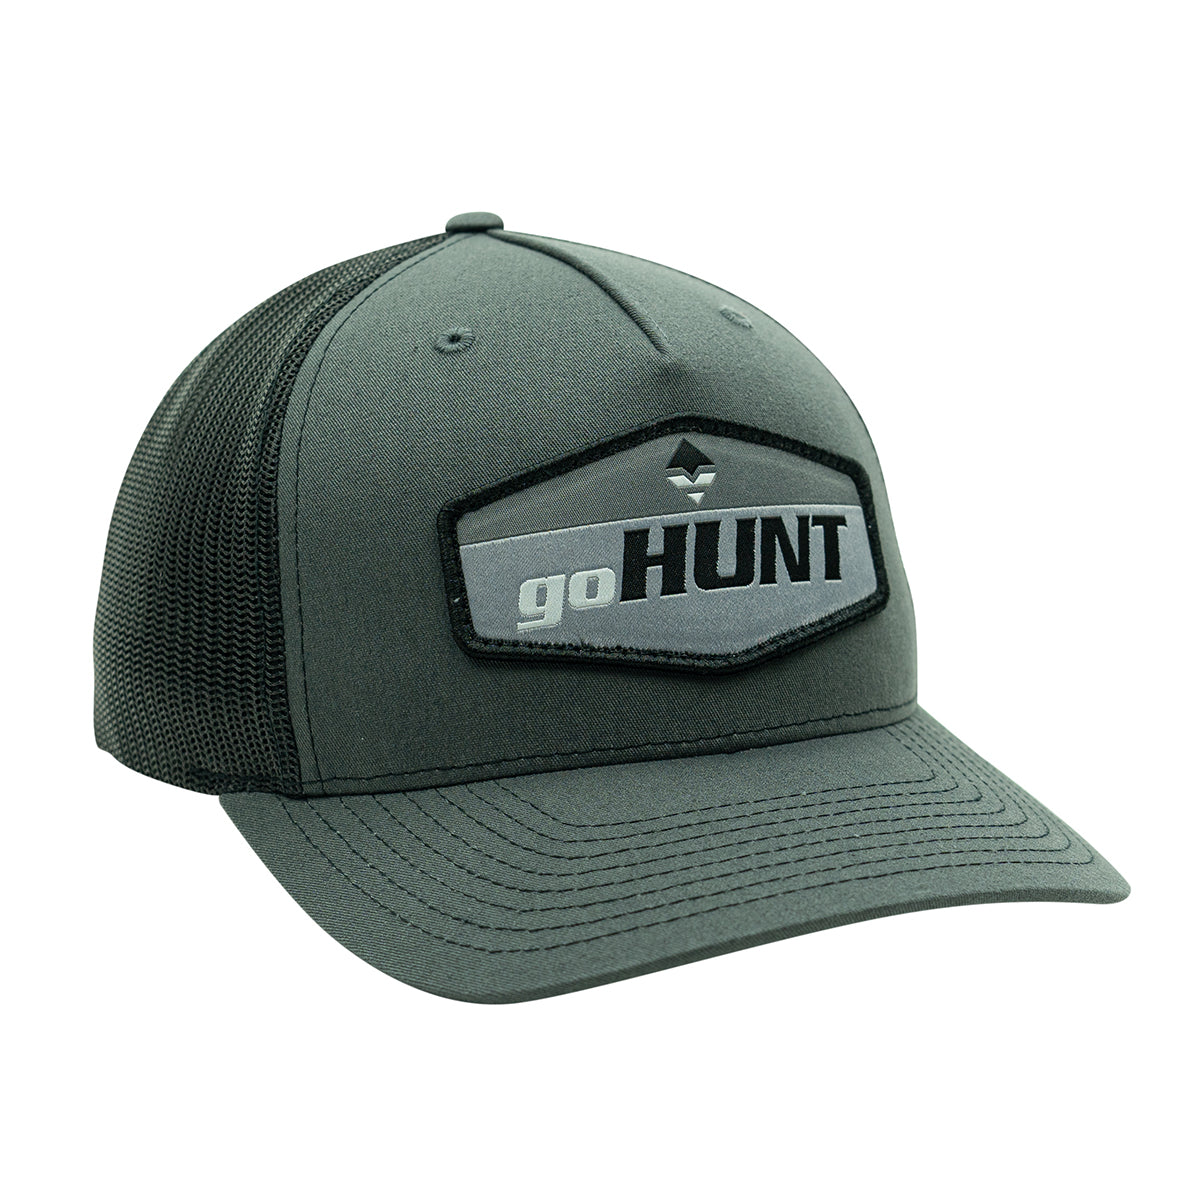 Trail Expert in Trail Expert by goHUNT | Apparel - goHUNT Shop by GOHUNT | GOHUNT - GOHUNT Shop